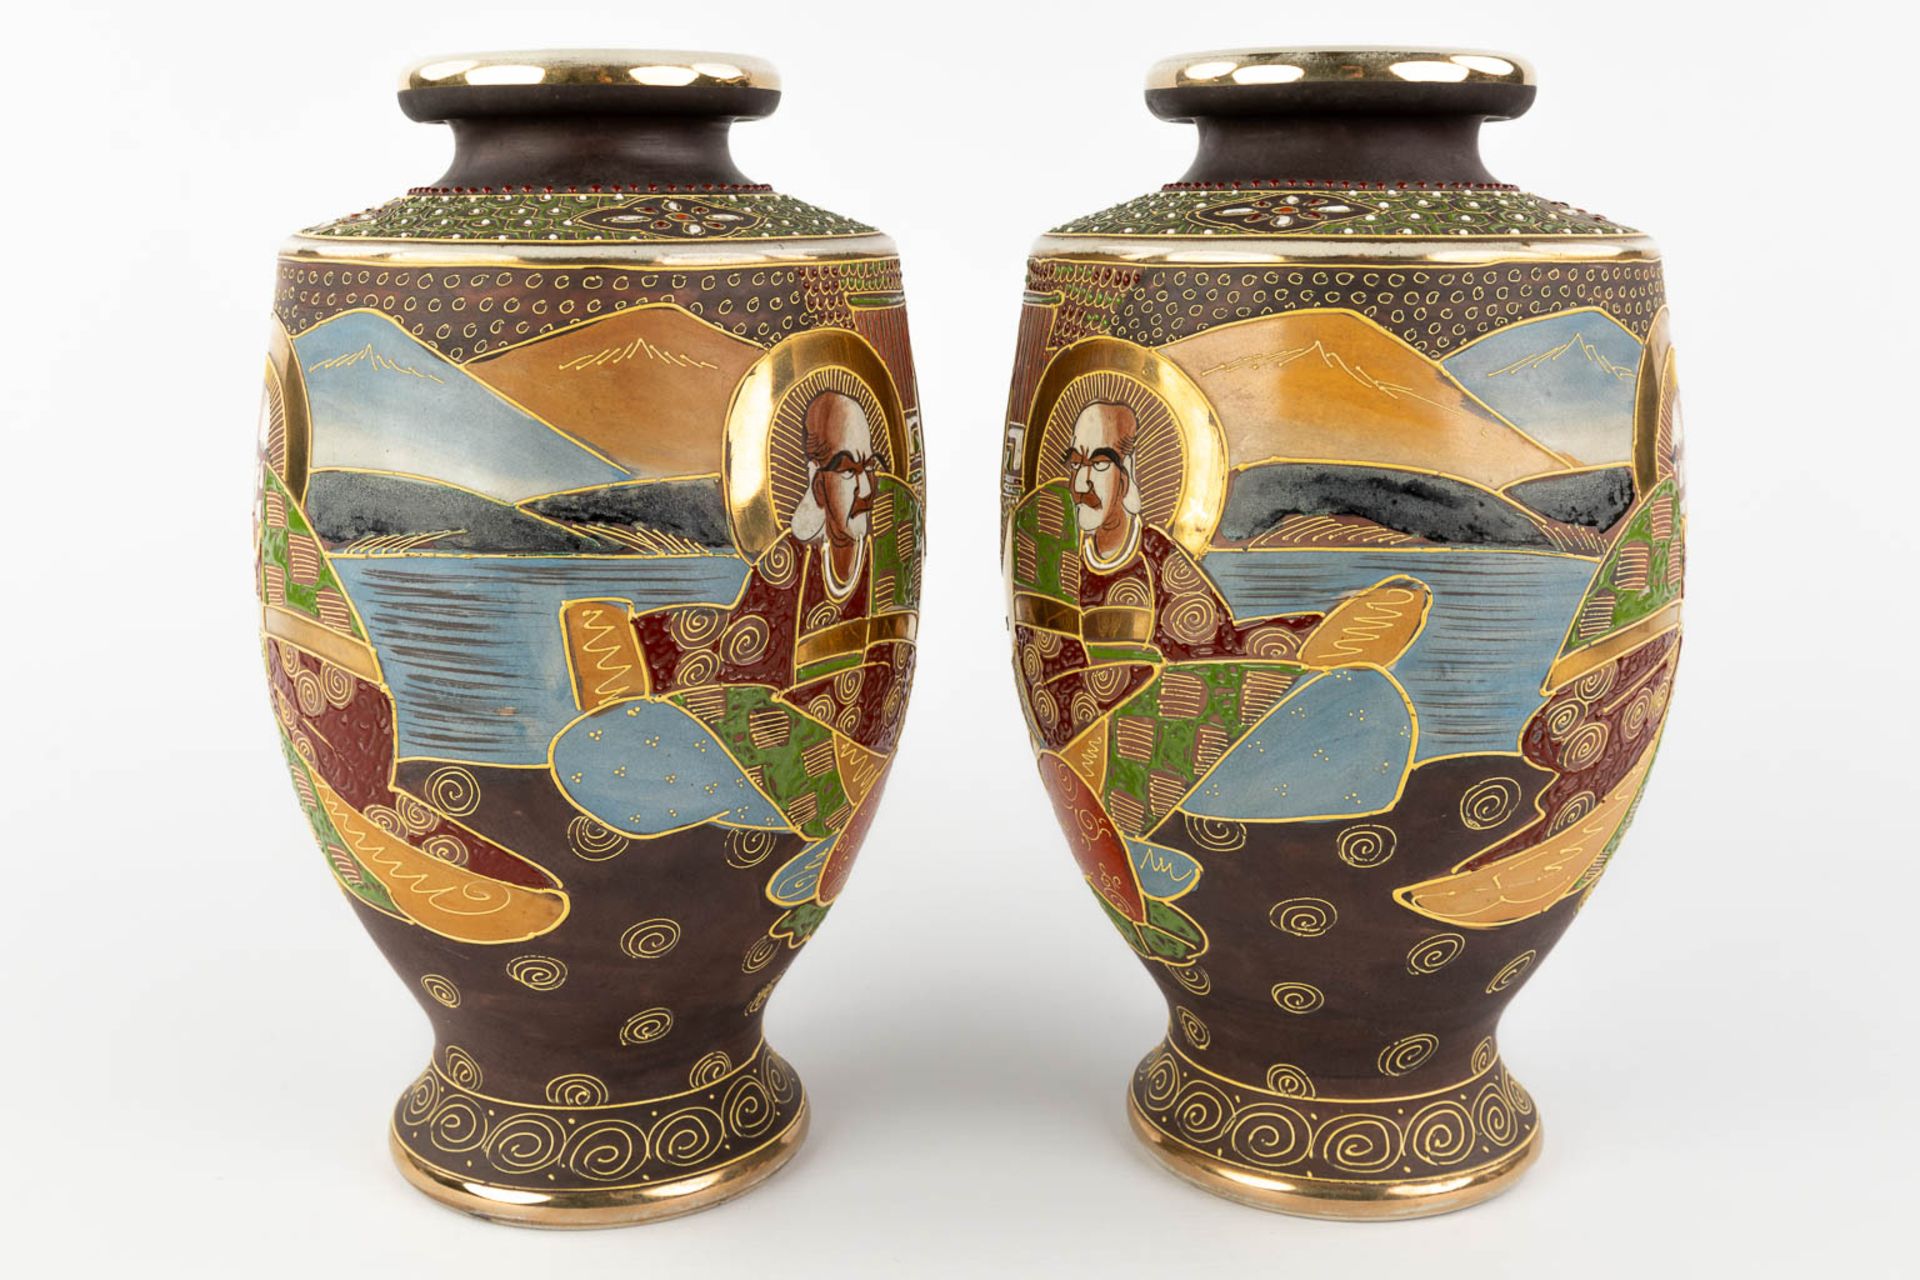 A pair of vases, a vase and jar with lid, Satsuma faience, Japan. 20th C. (H:31 x D:19 cm) - Image 5 of 19